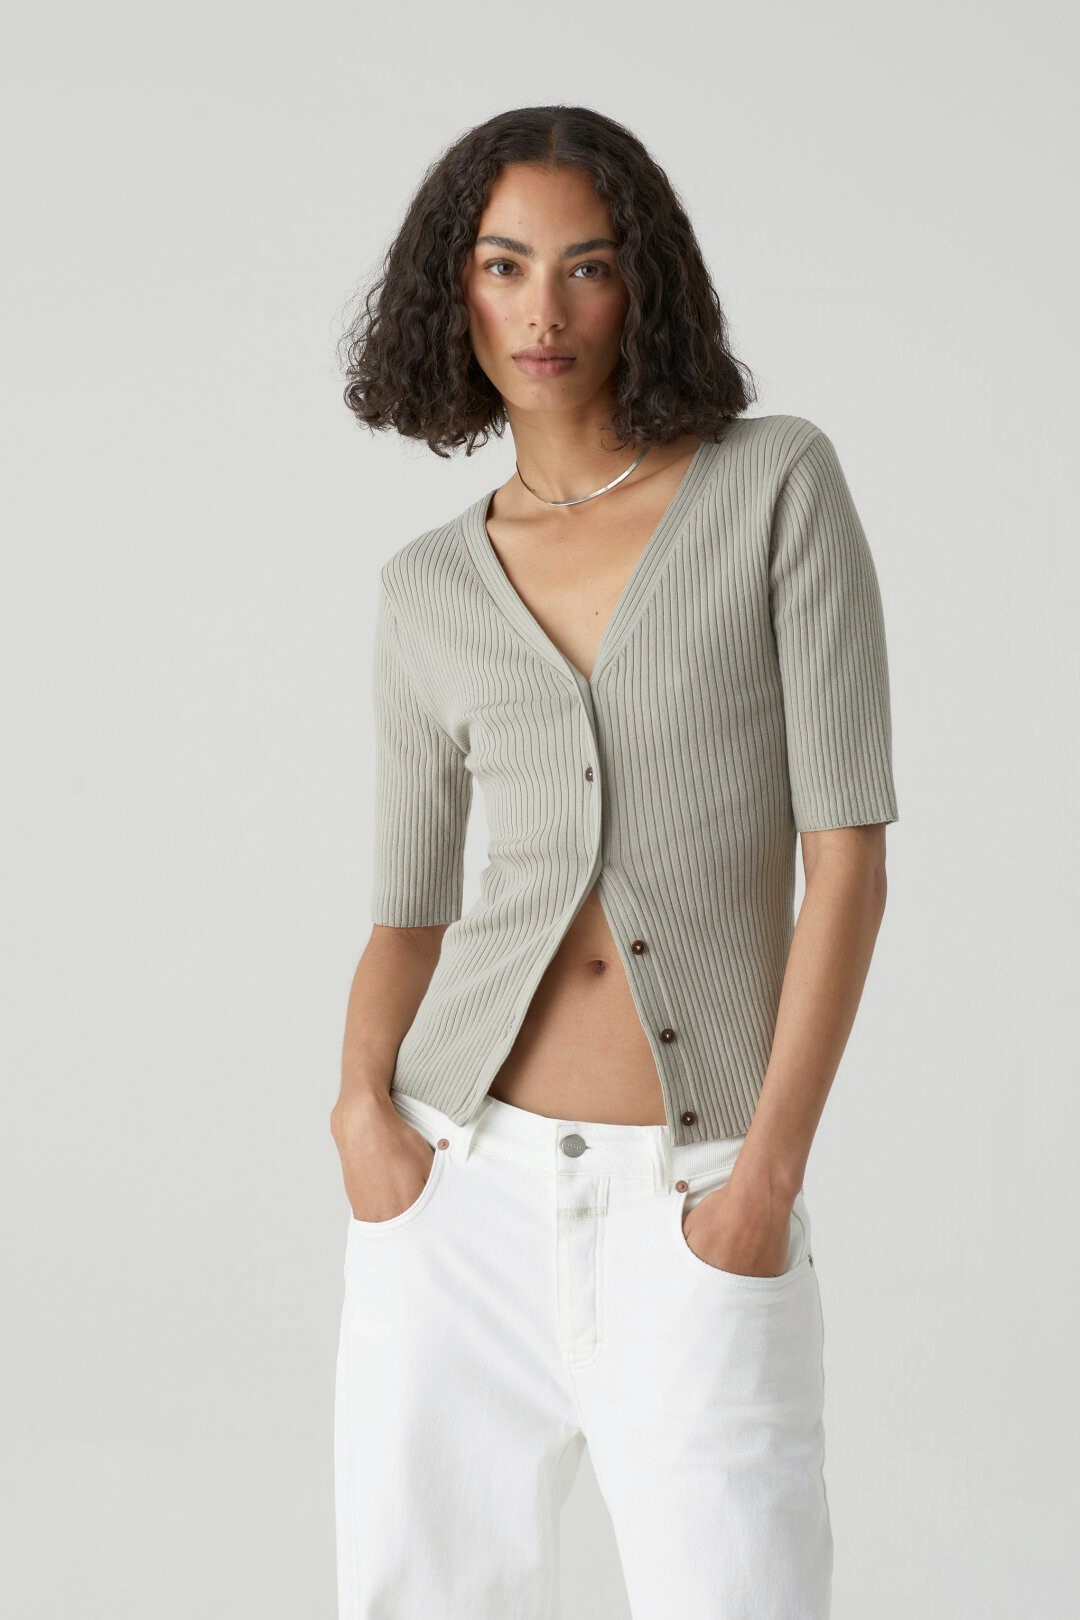 CLOSED Knitted Cardigan in Khaki